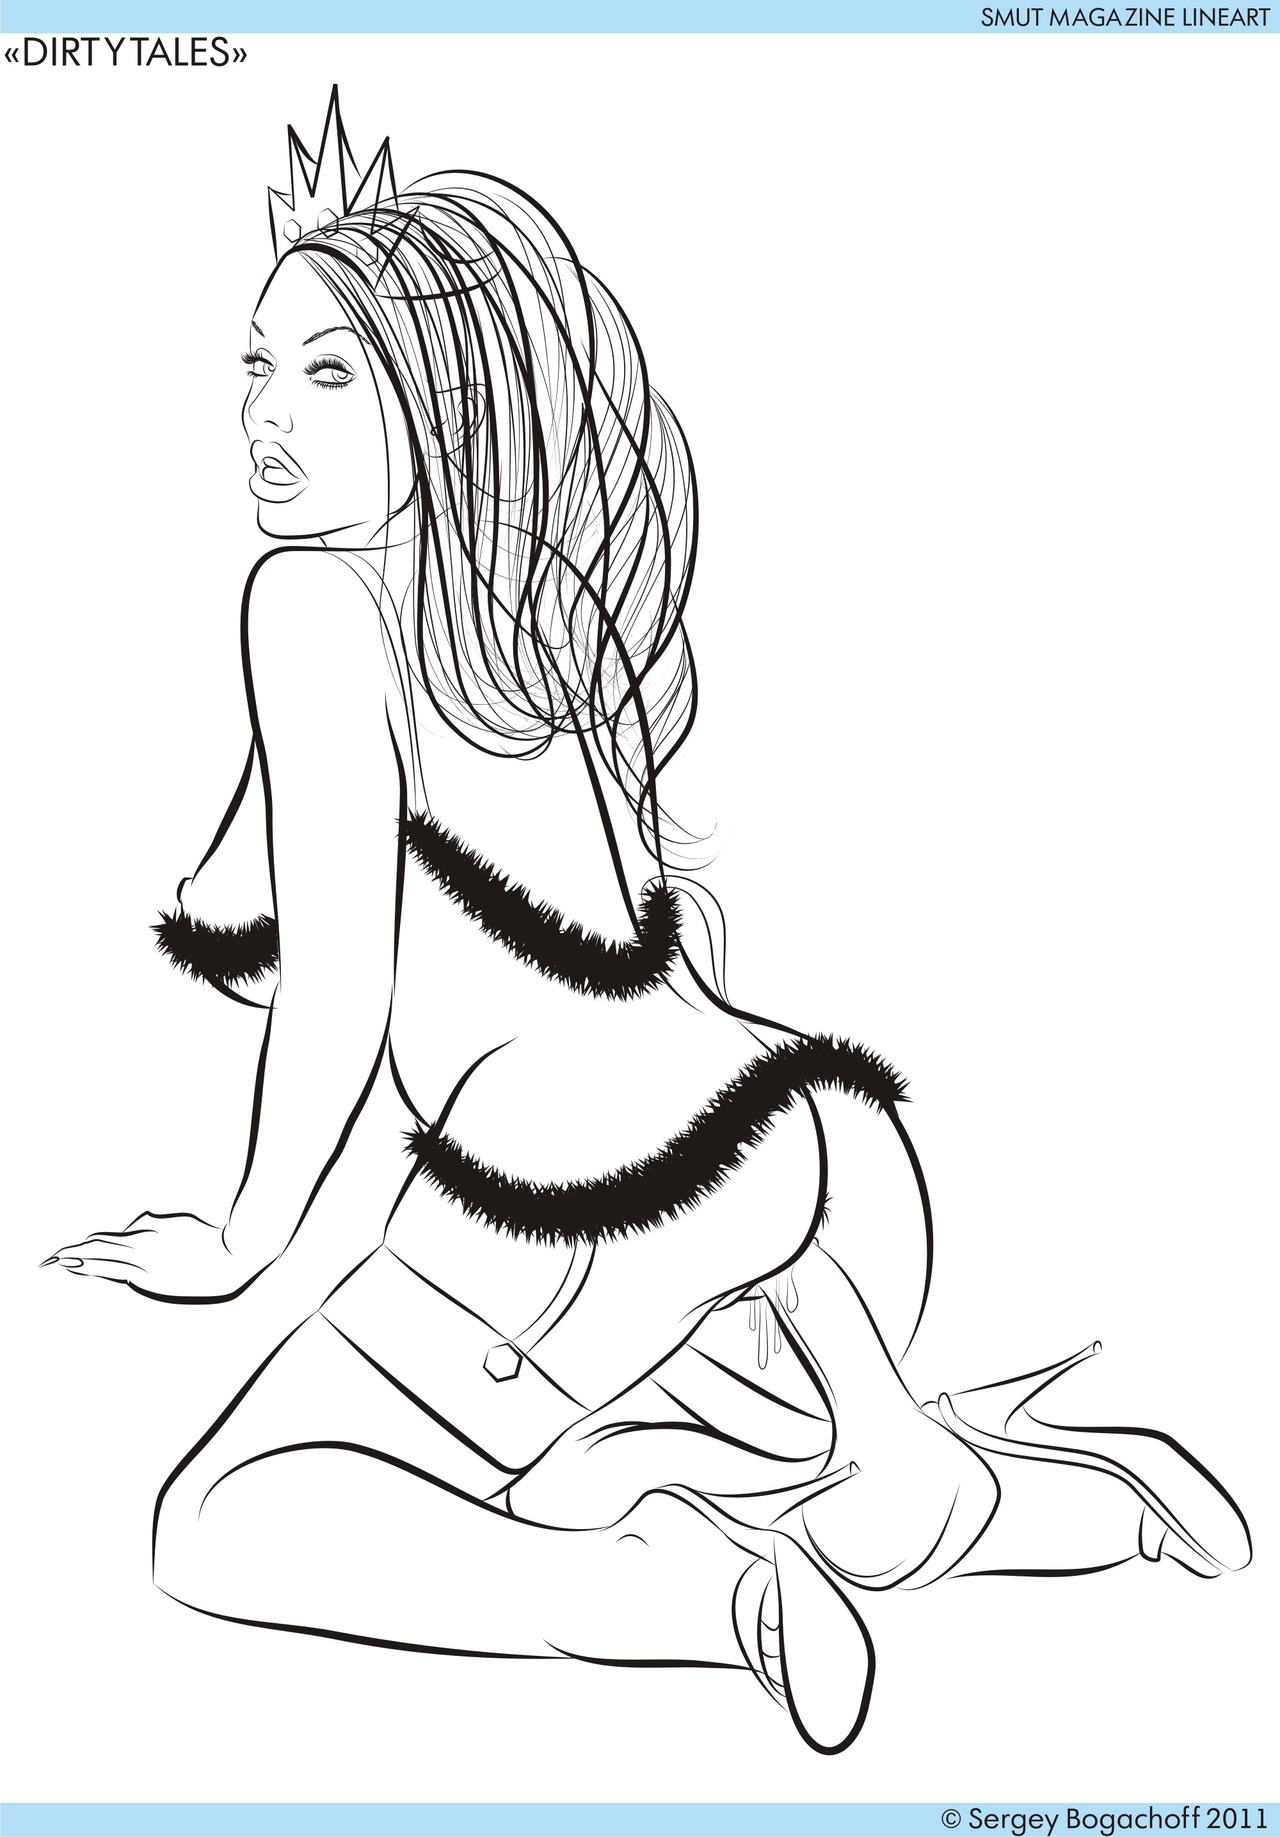 SMUT MAGAZINE Dirtytales Lineart 